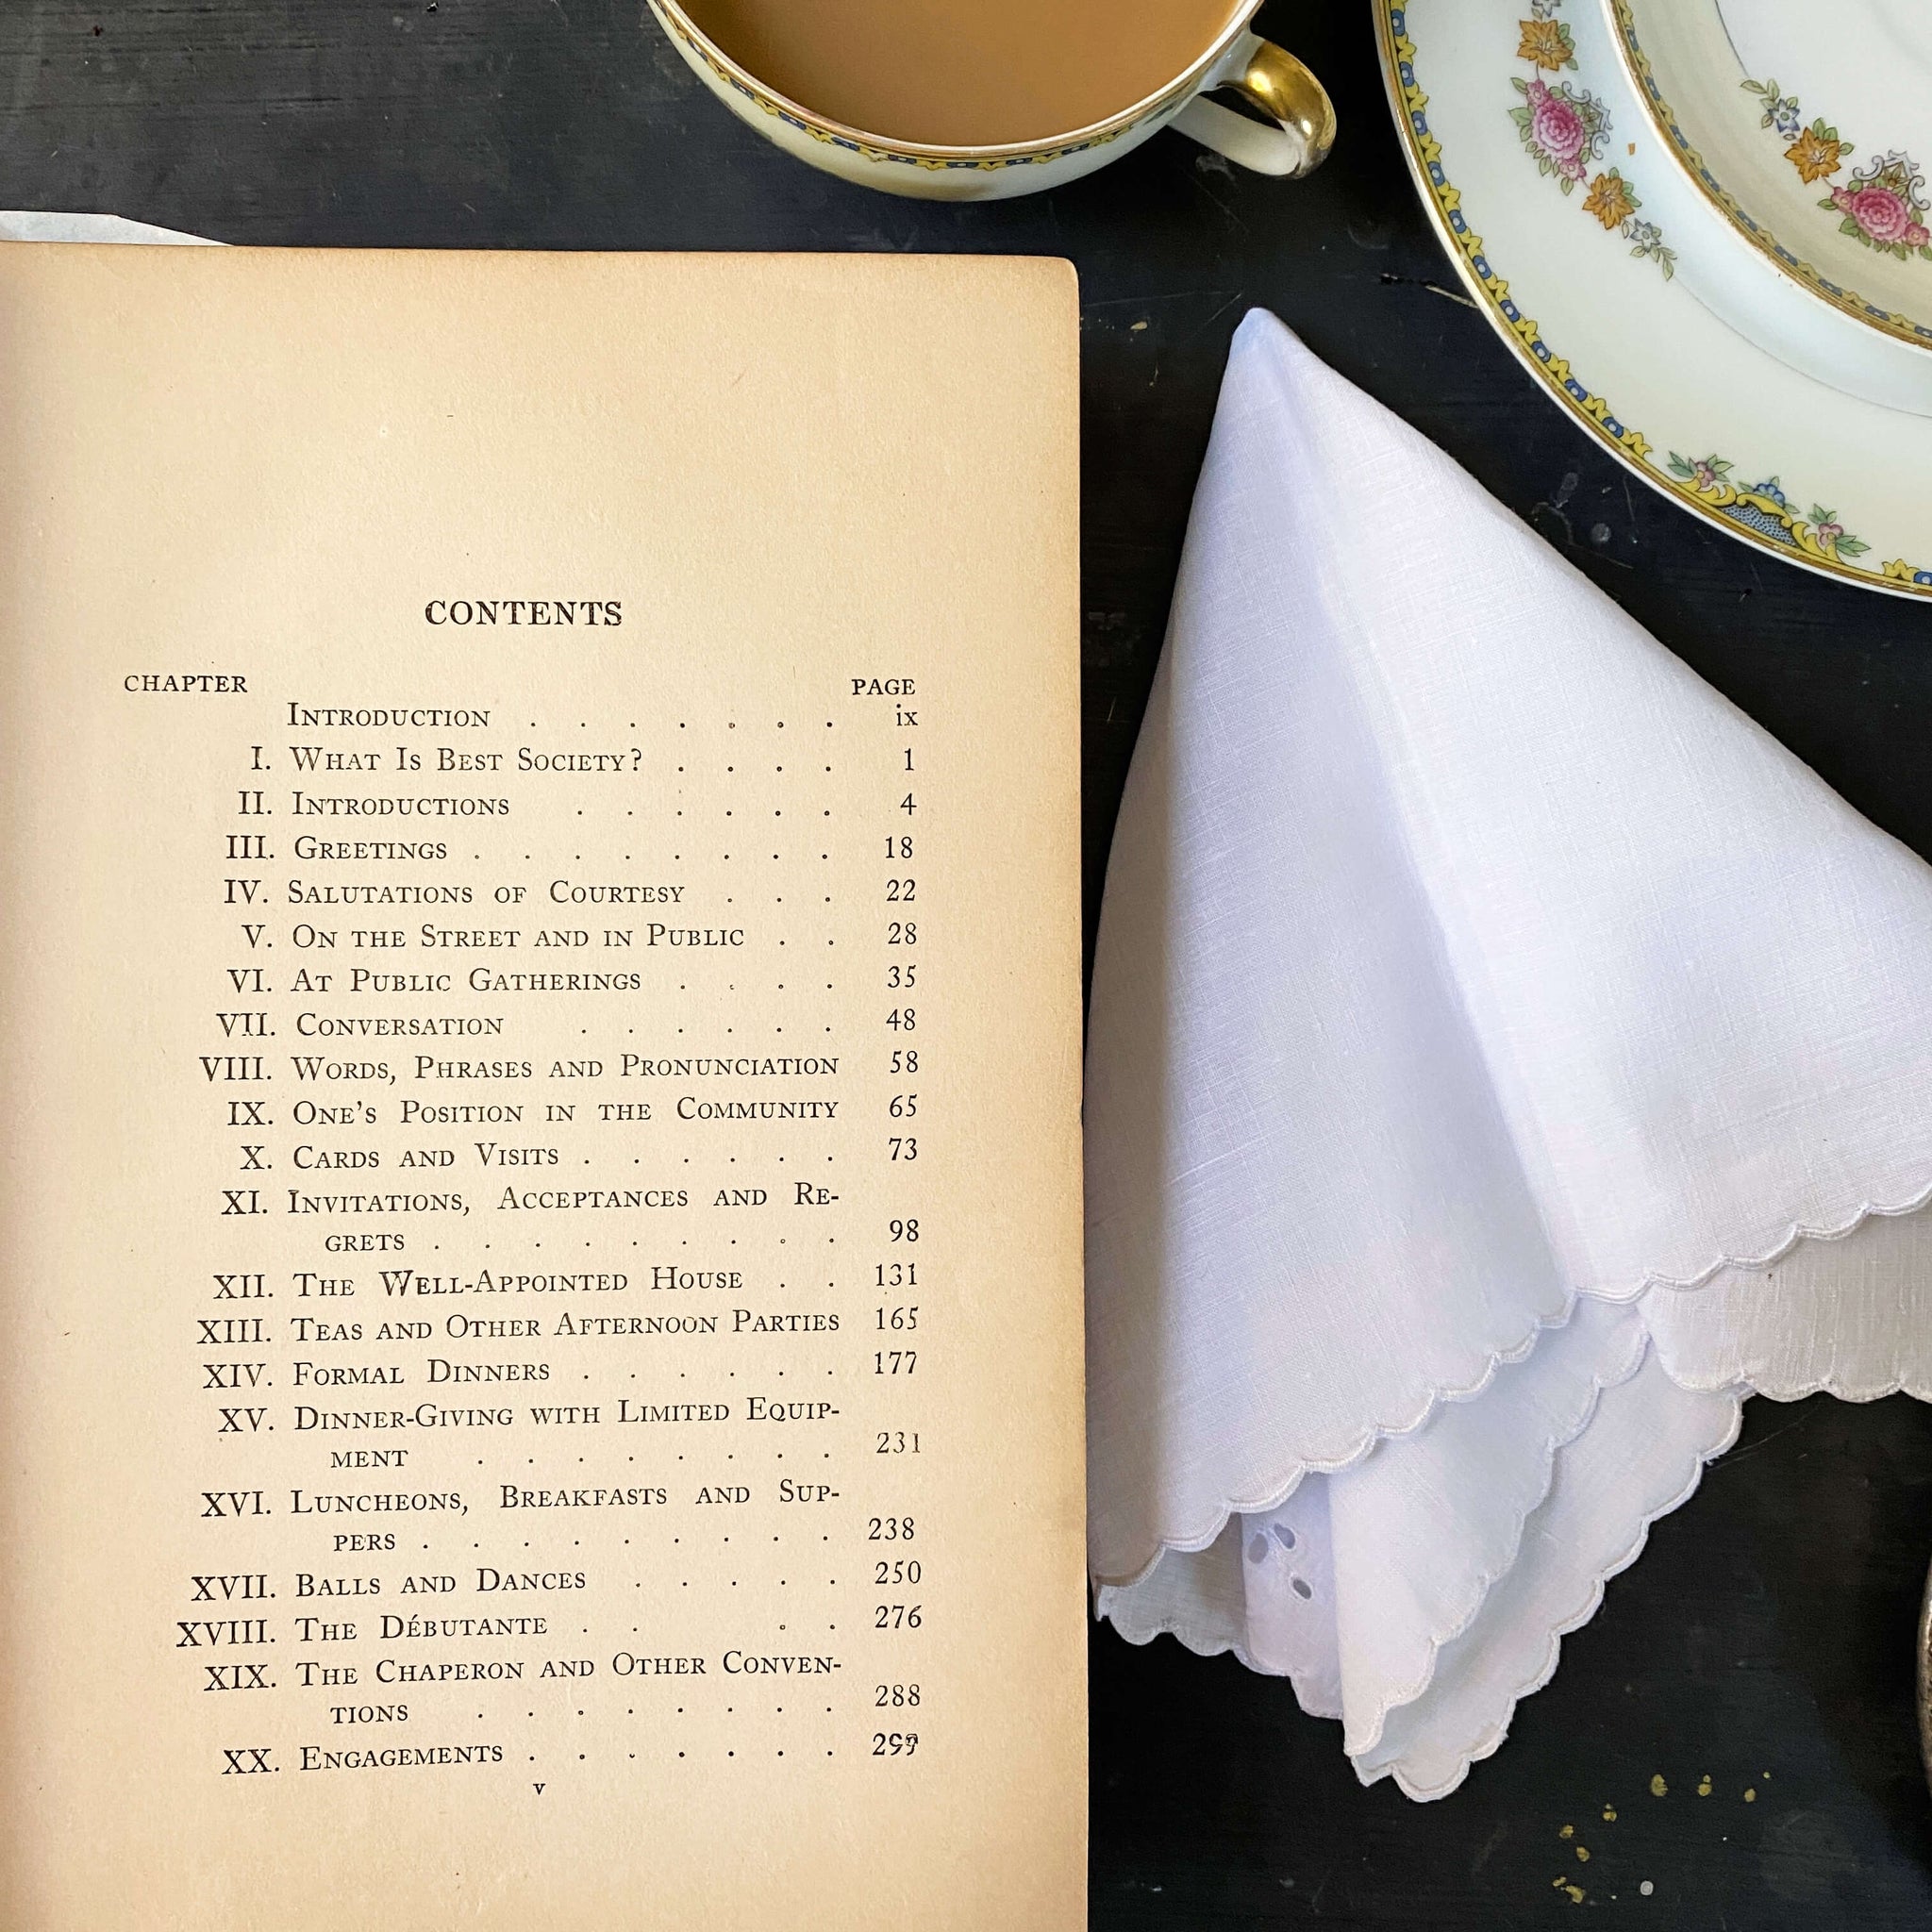 Etiquette by Emily Post - 1925 Edition - 13th printing